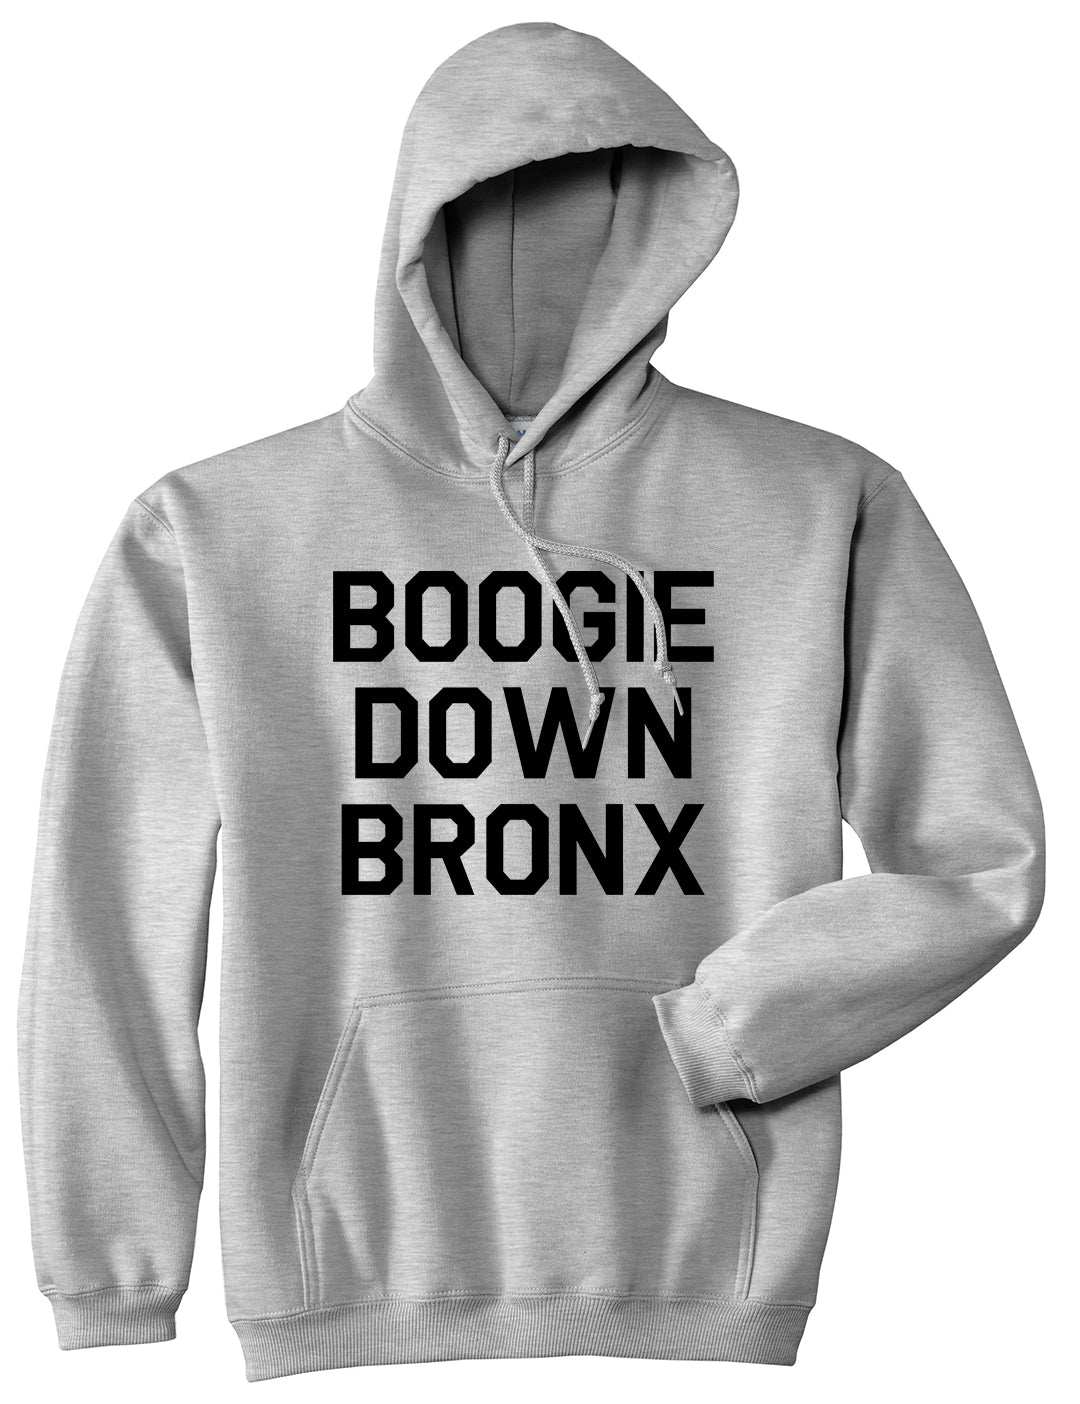 Boogie Down Bronx Mens Pullover Hoodie Grey by Kings Of NY